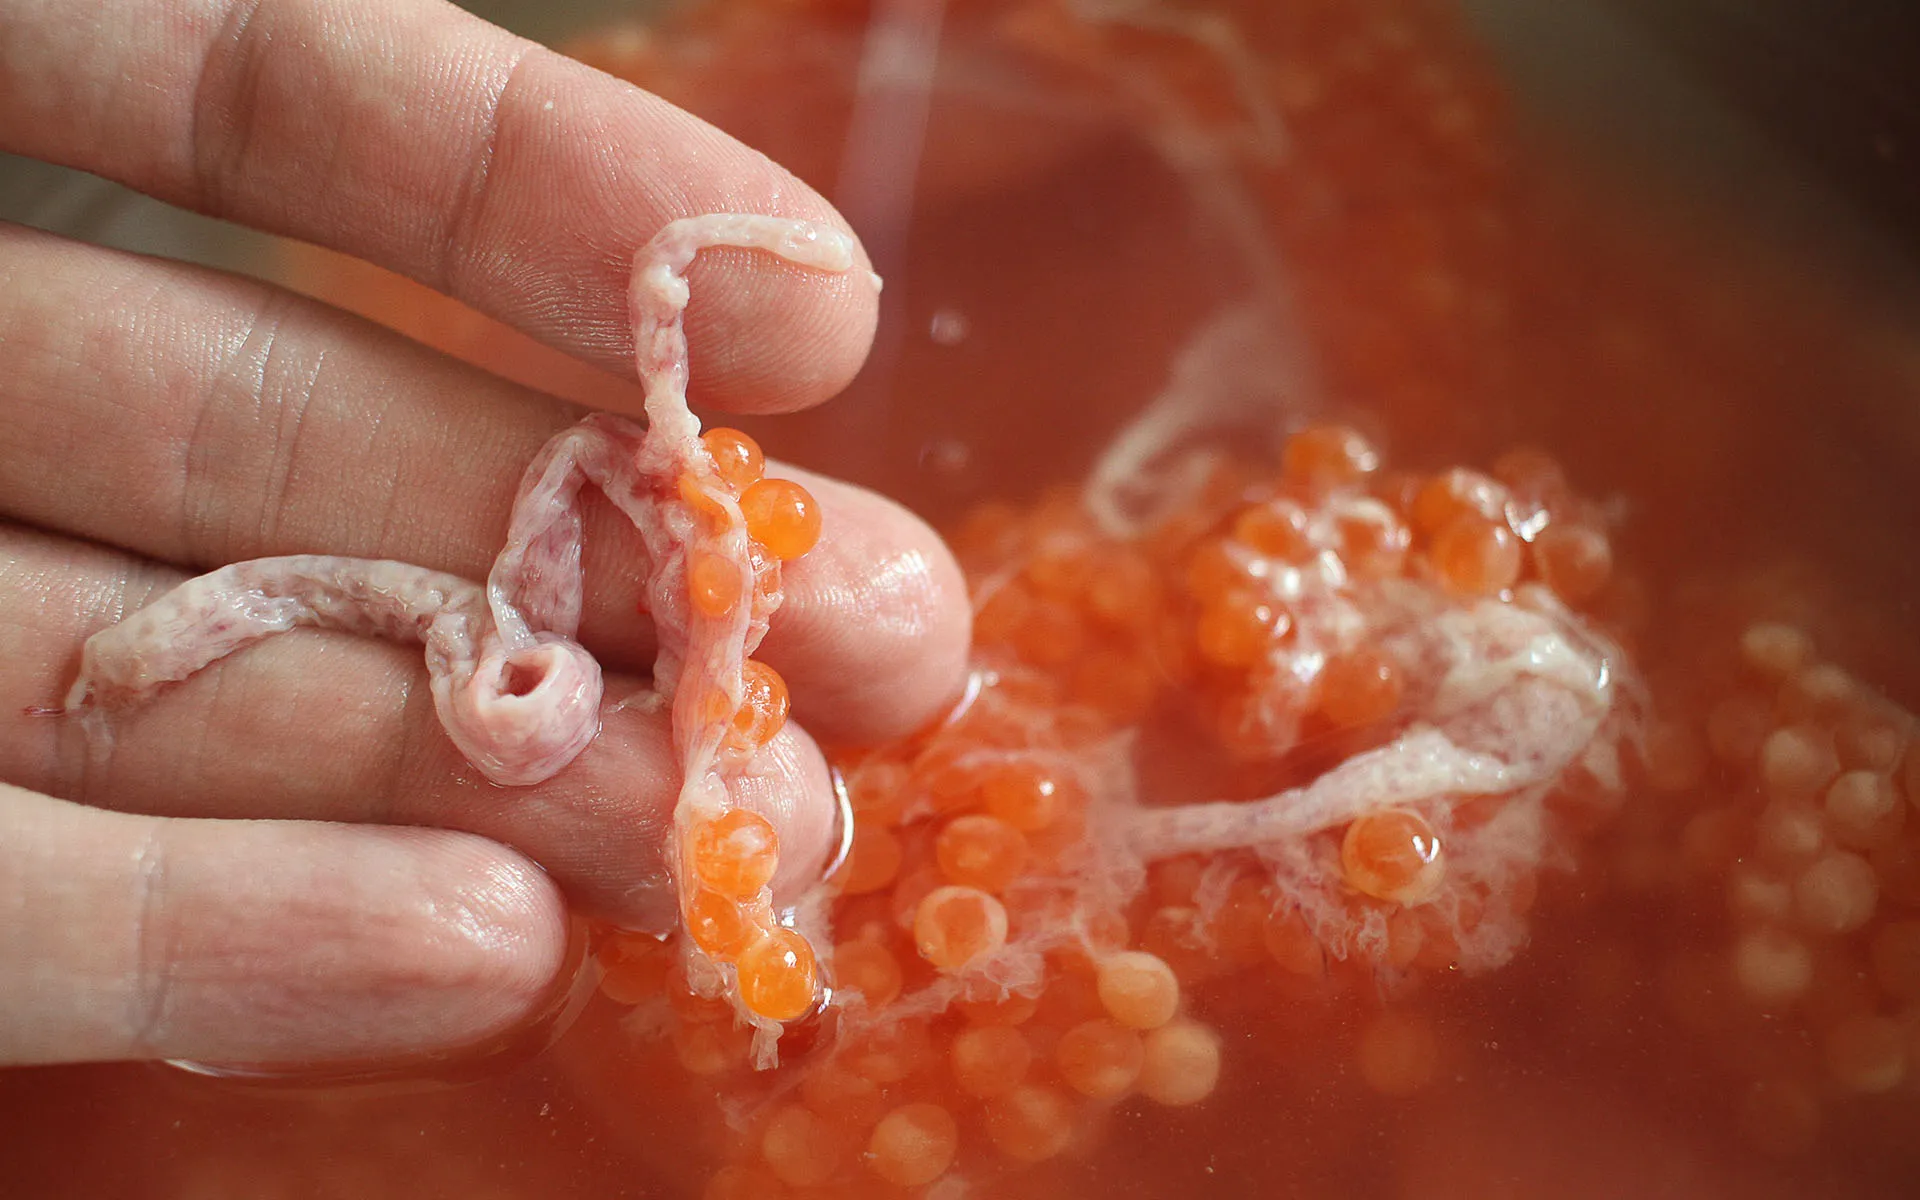 Bits of roe sack with eggs attached in warm water.